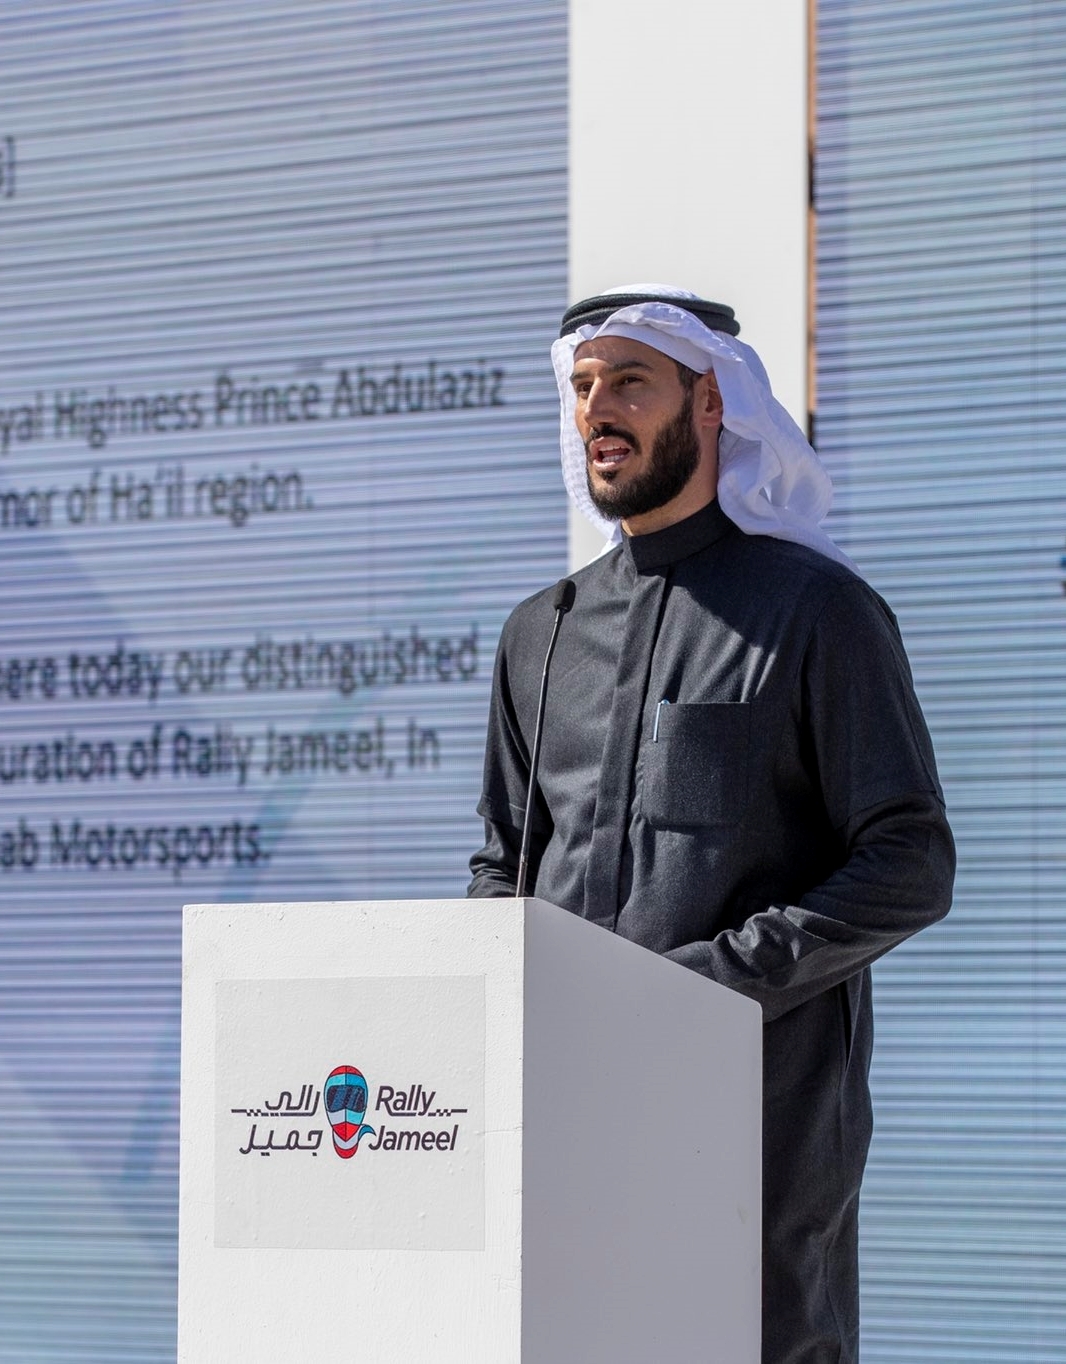 Hassan Jameel speaking at a podium during an ALJ motorsport event